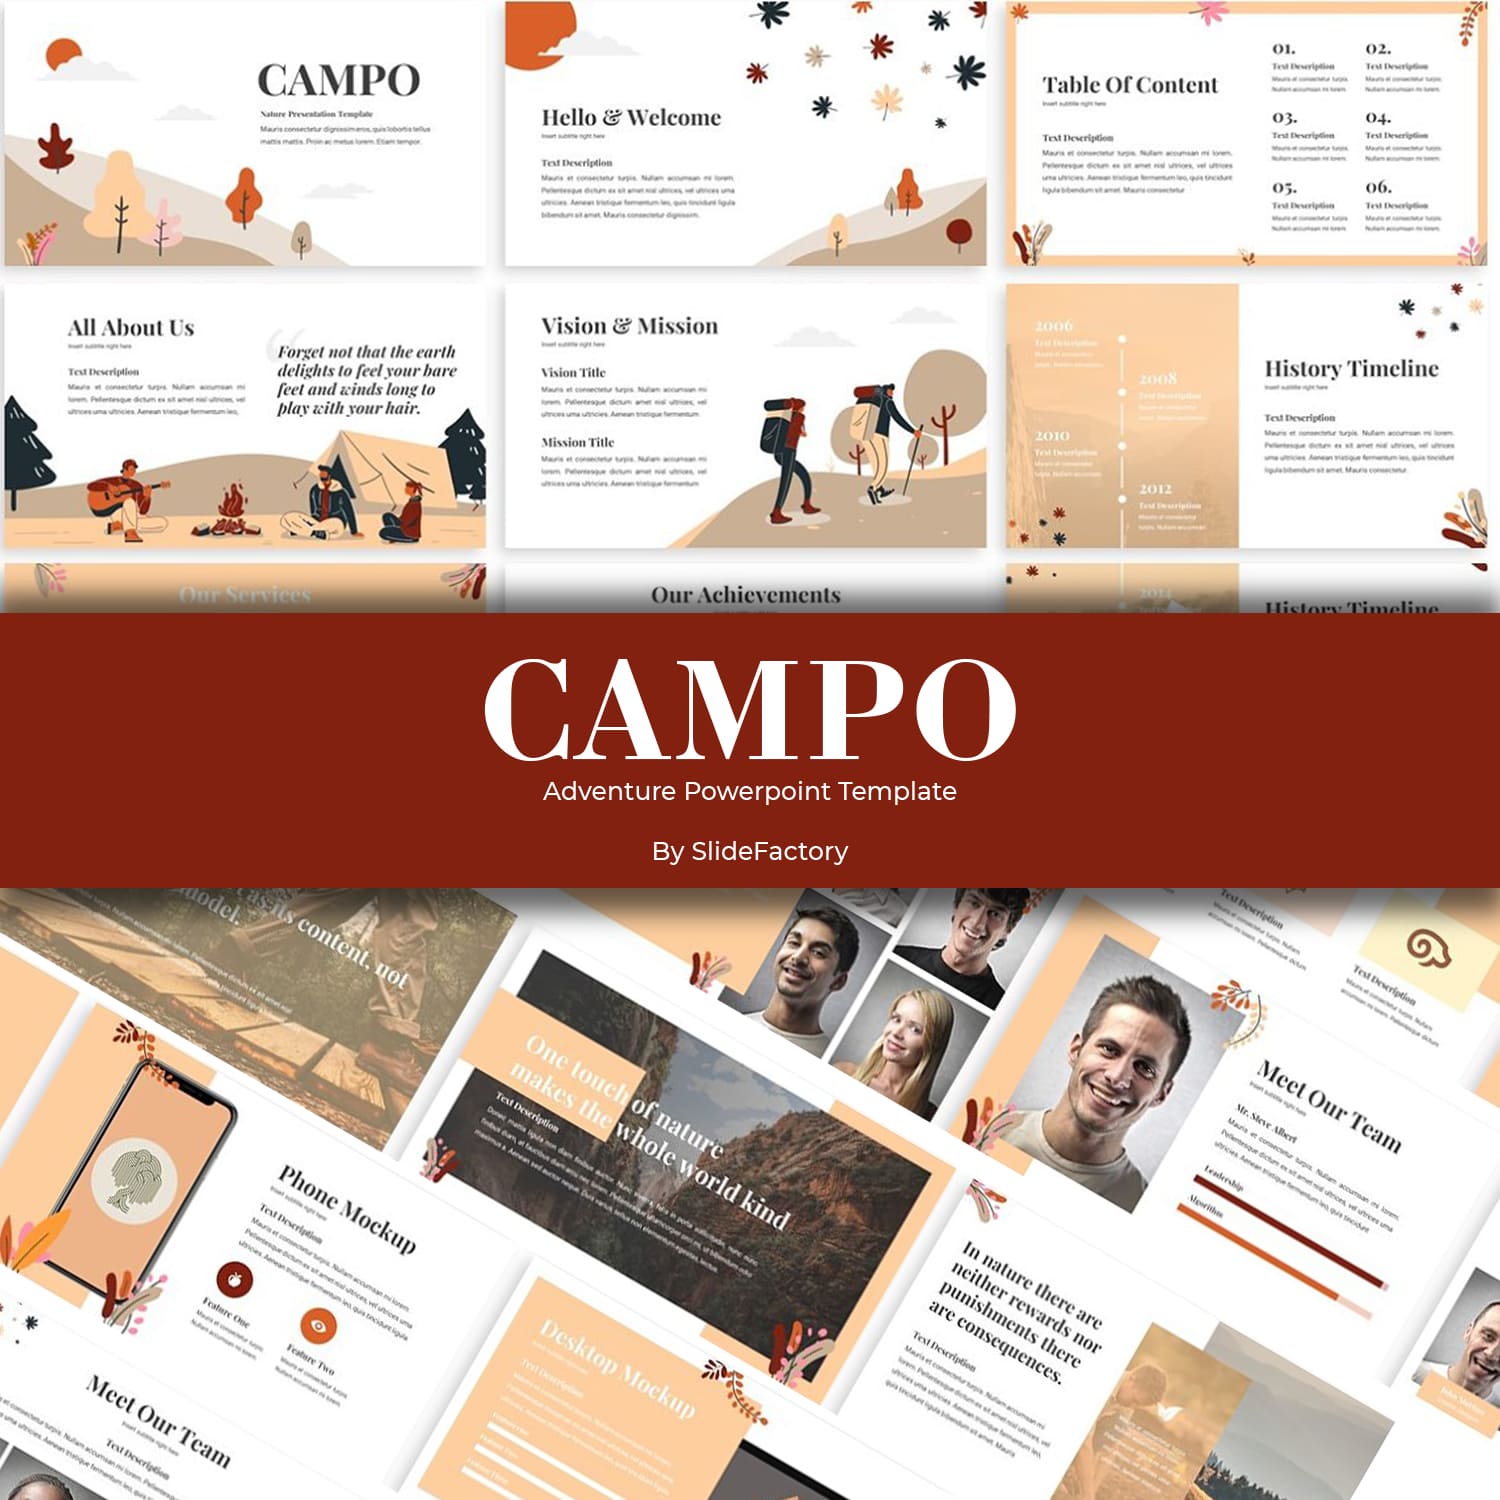 This is a Creative & Abstract Powerpoint template with custom illustration..